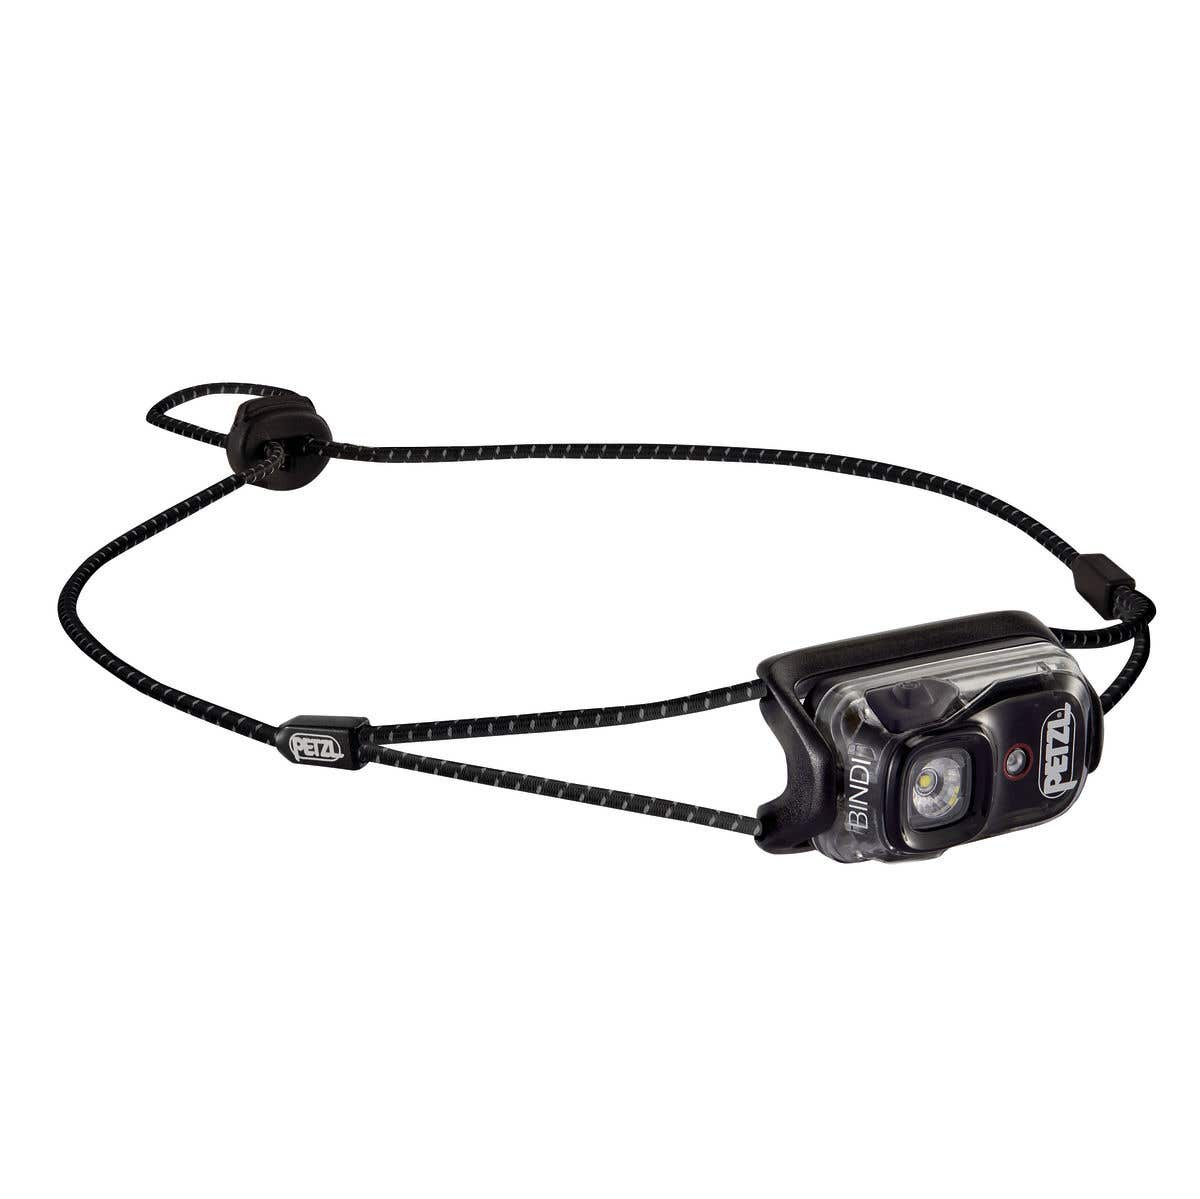 Sales Discounts Petzl Bindi 68% off for All the people